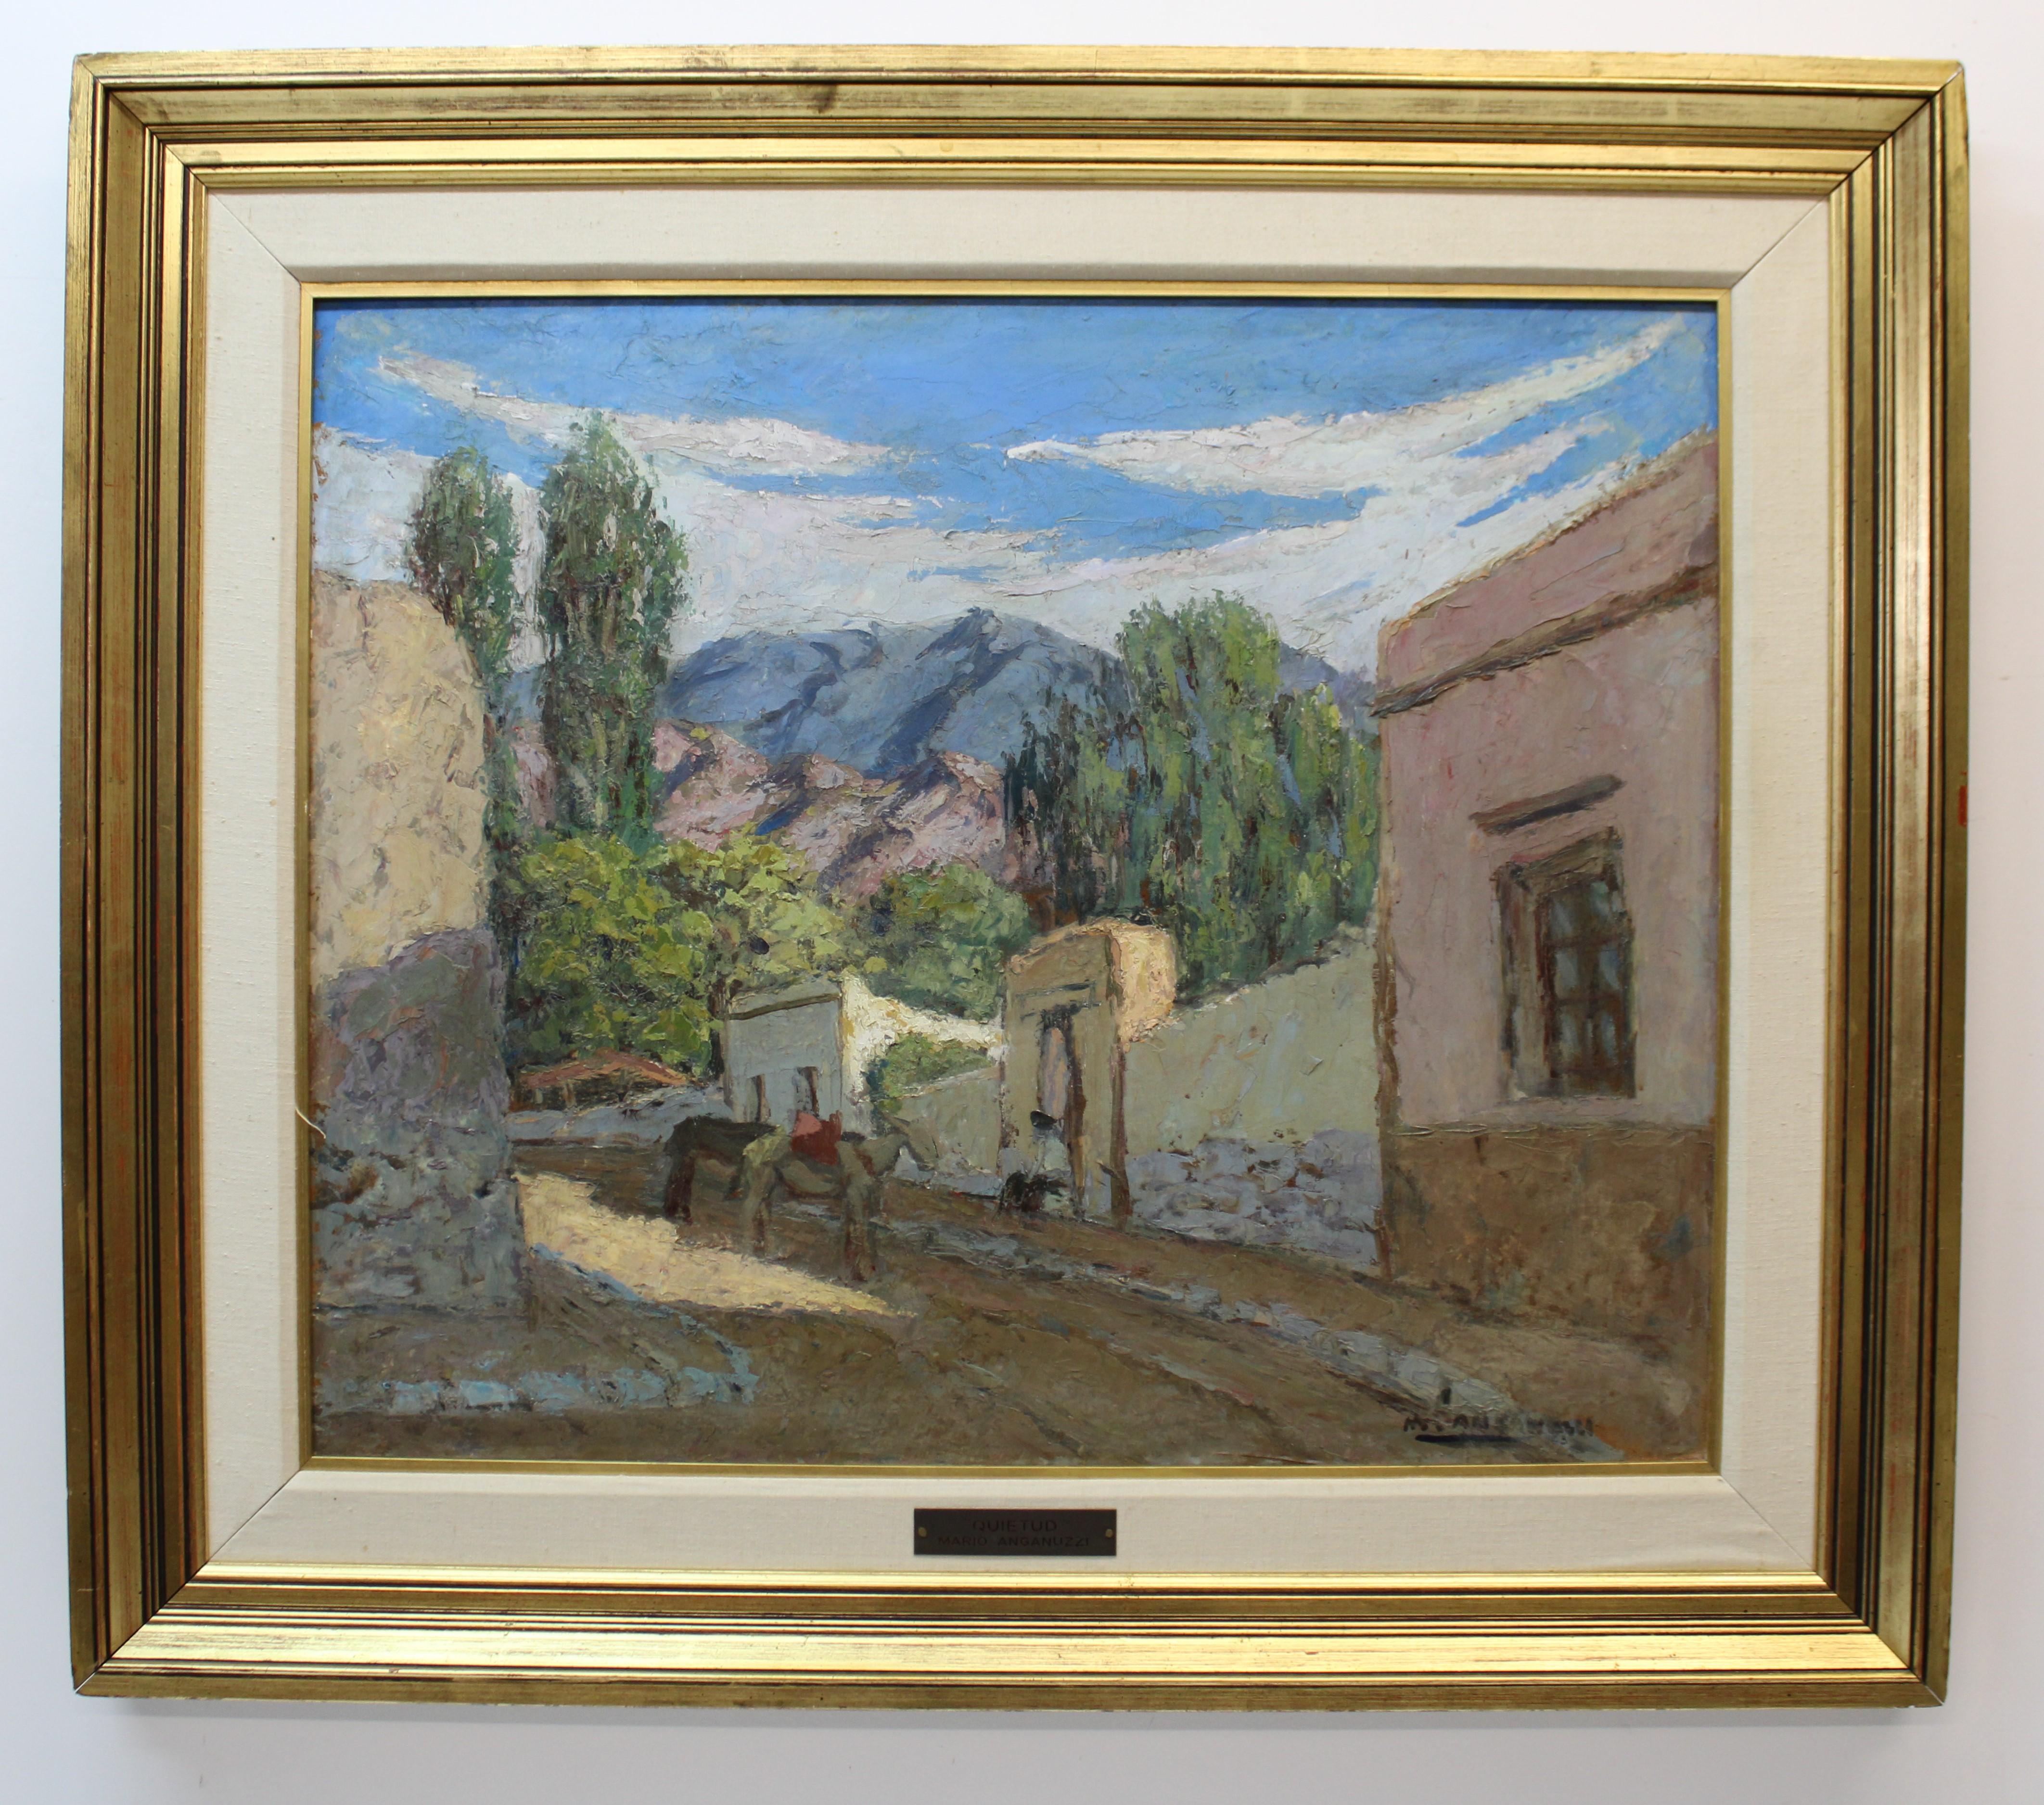 Unknown Landscape Painting - Mario Anganuzzi " Quietud " Oil on Board